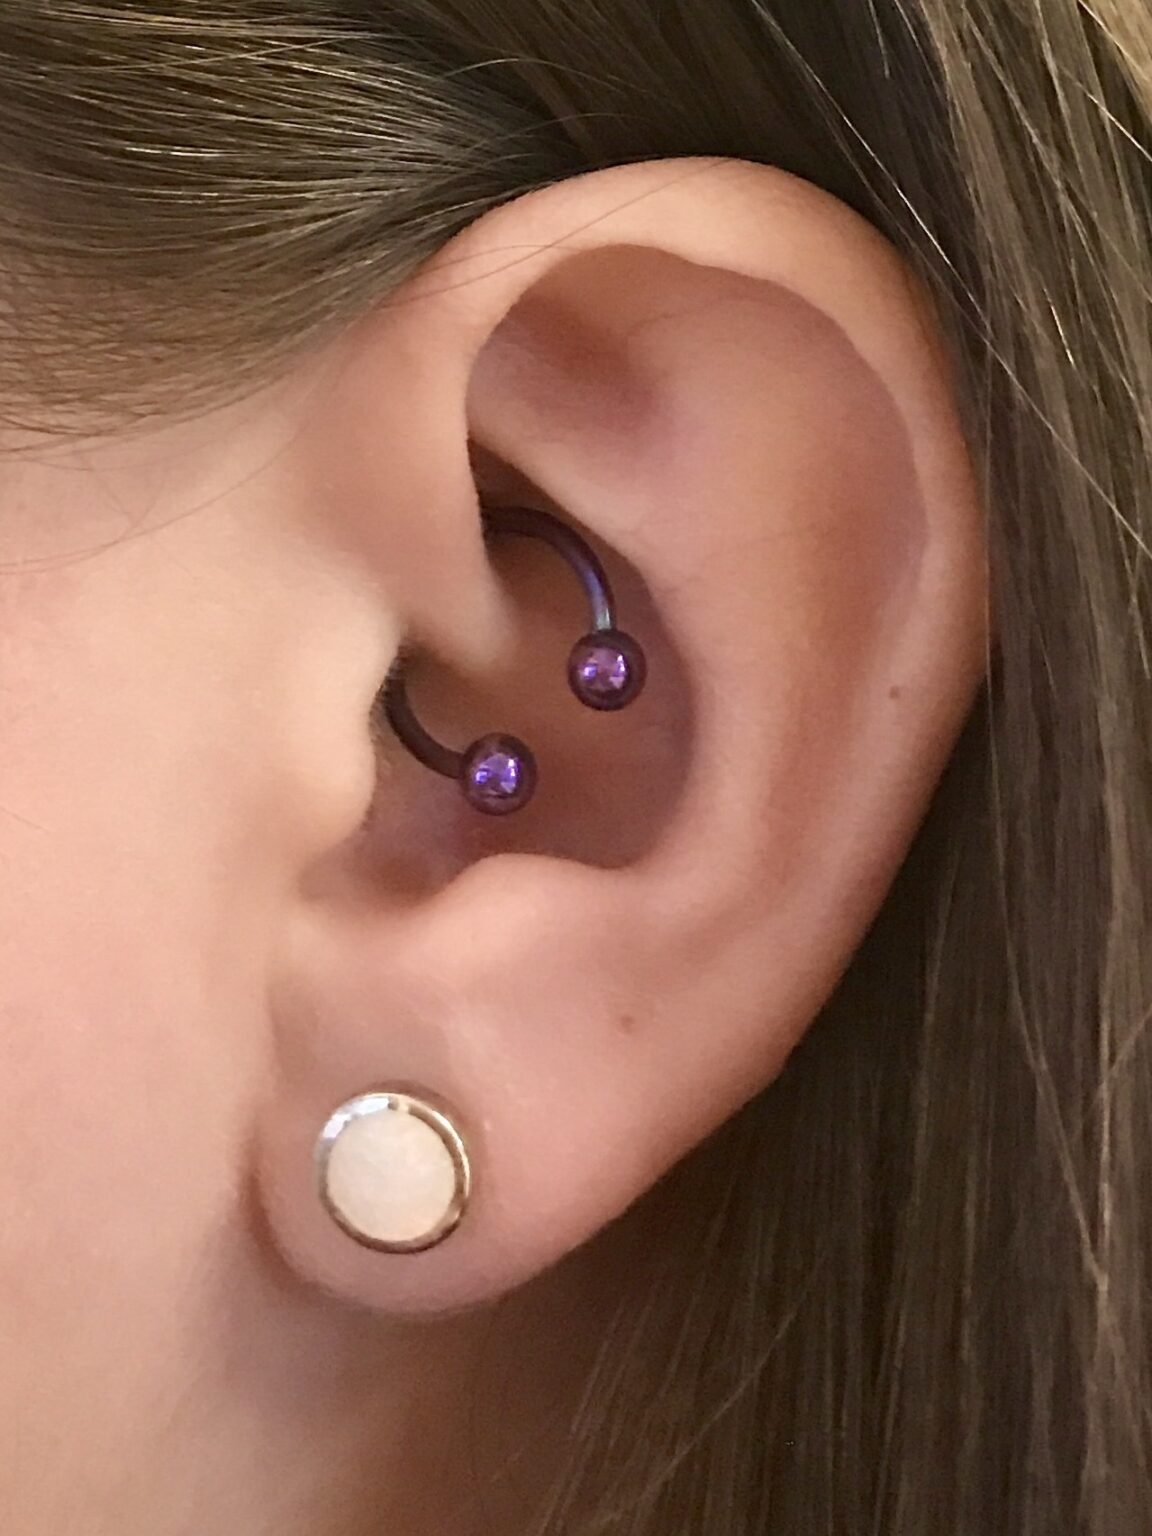 125 Daith piercing Ideas, pain and heal process You Must